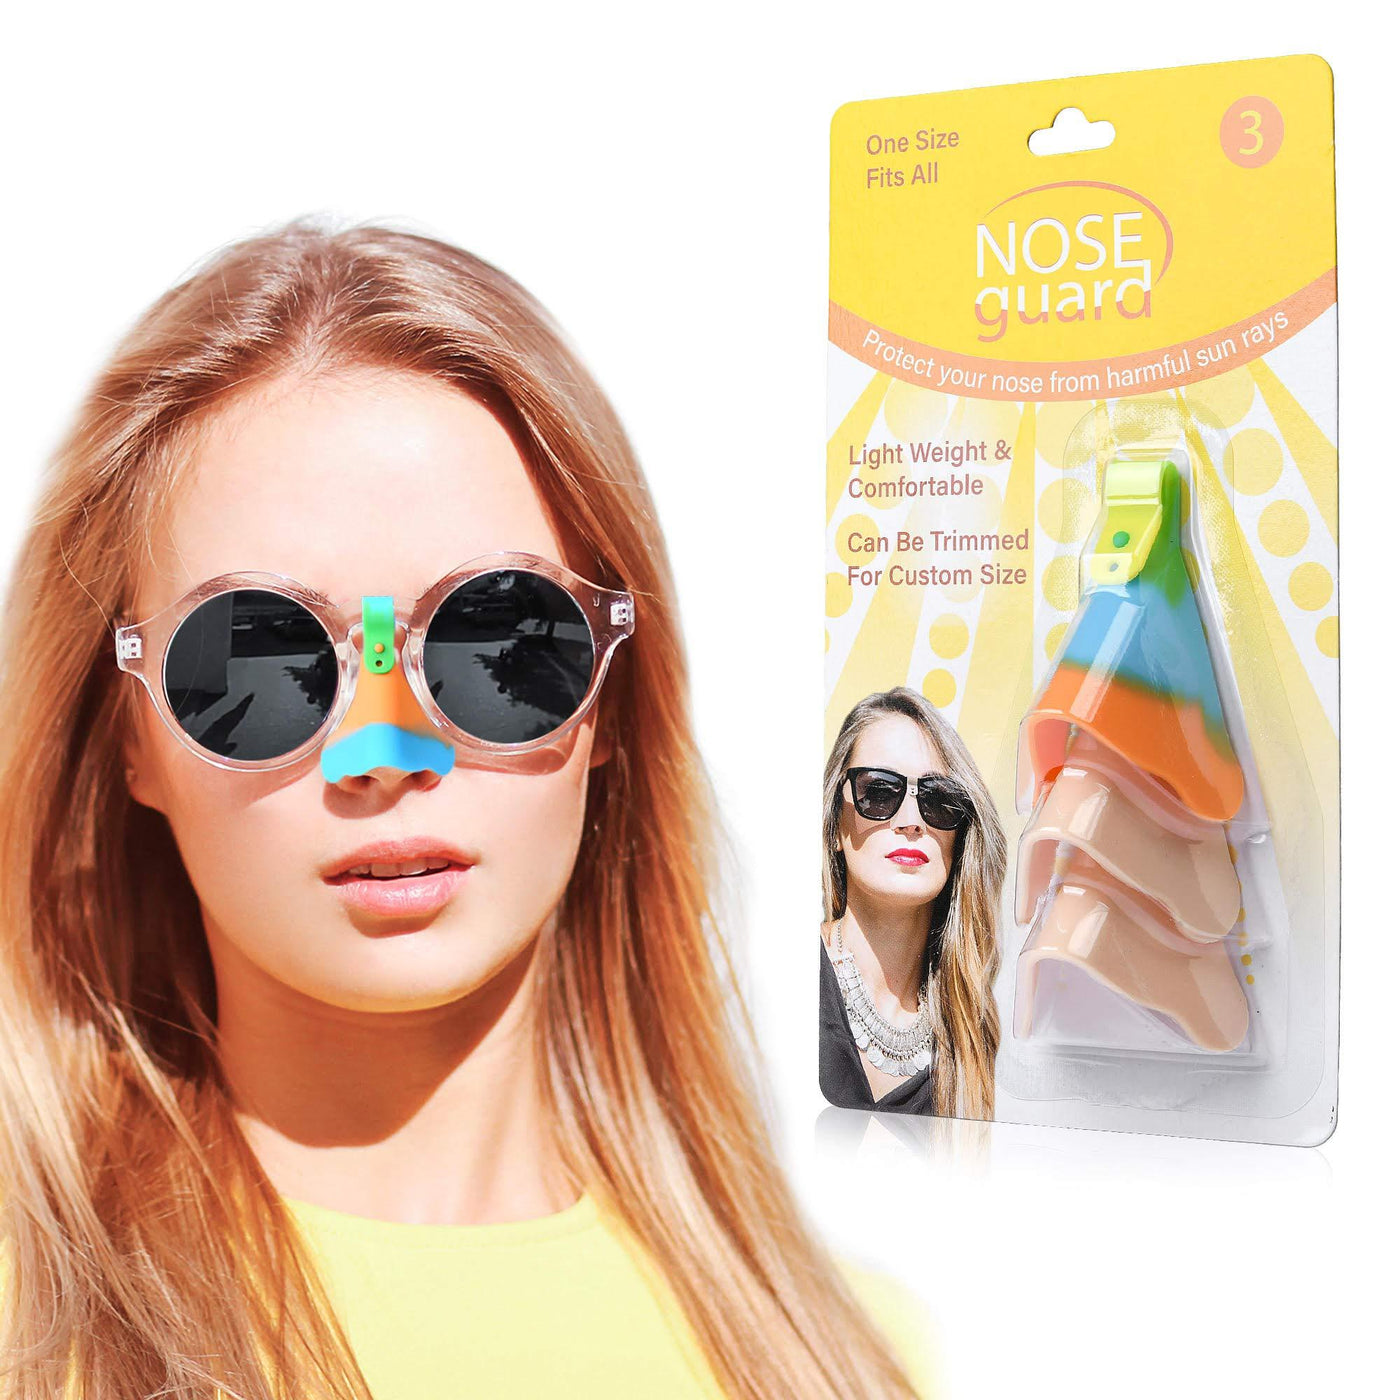 UV Nose Guards for Glasses - Nose Sun Protection - Sun Nose Guard